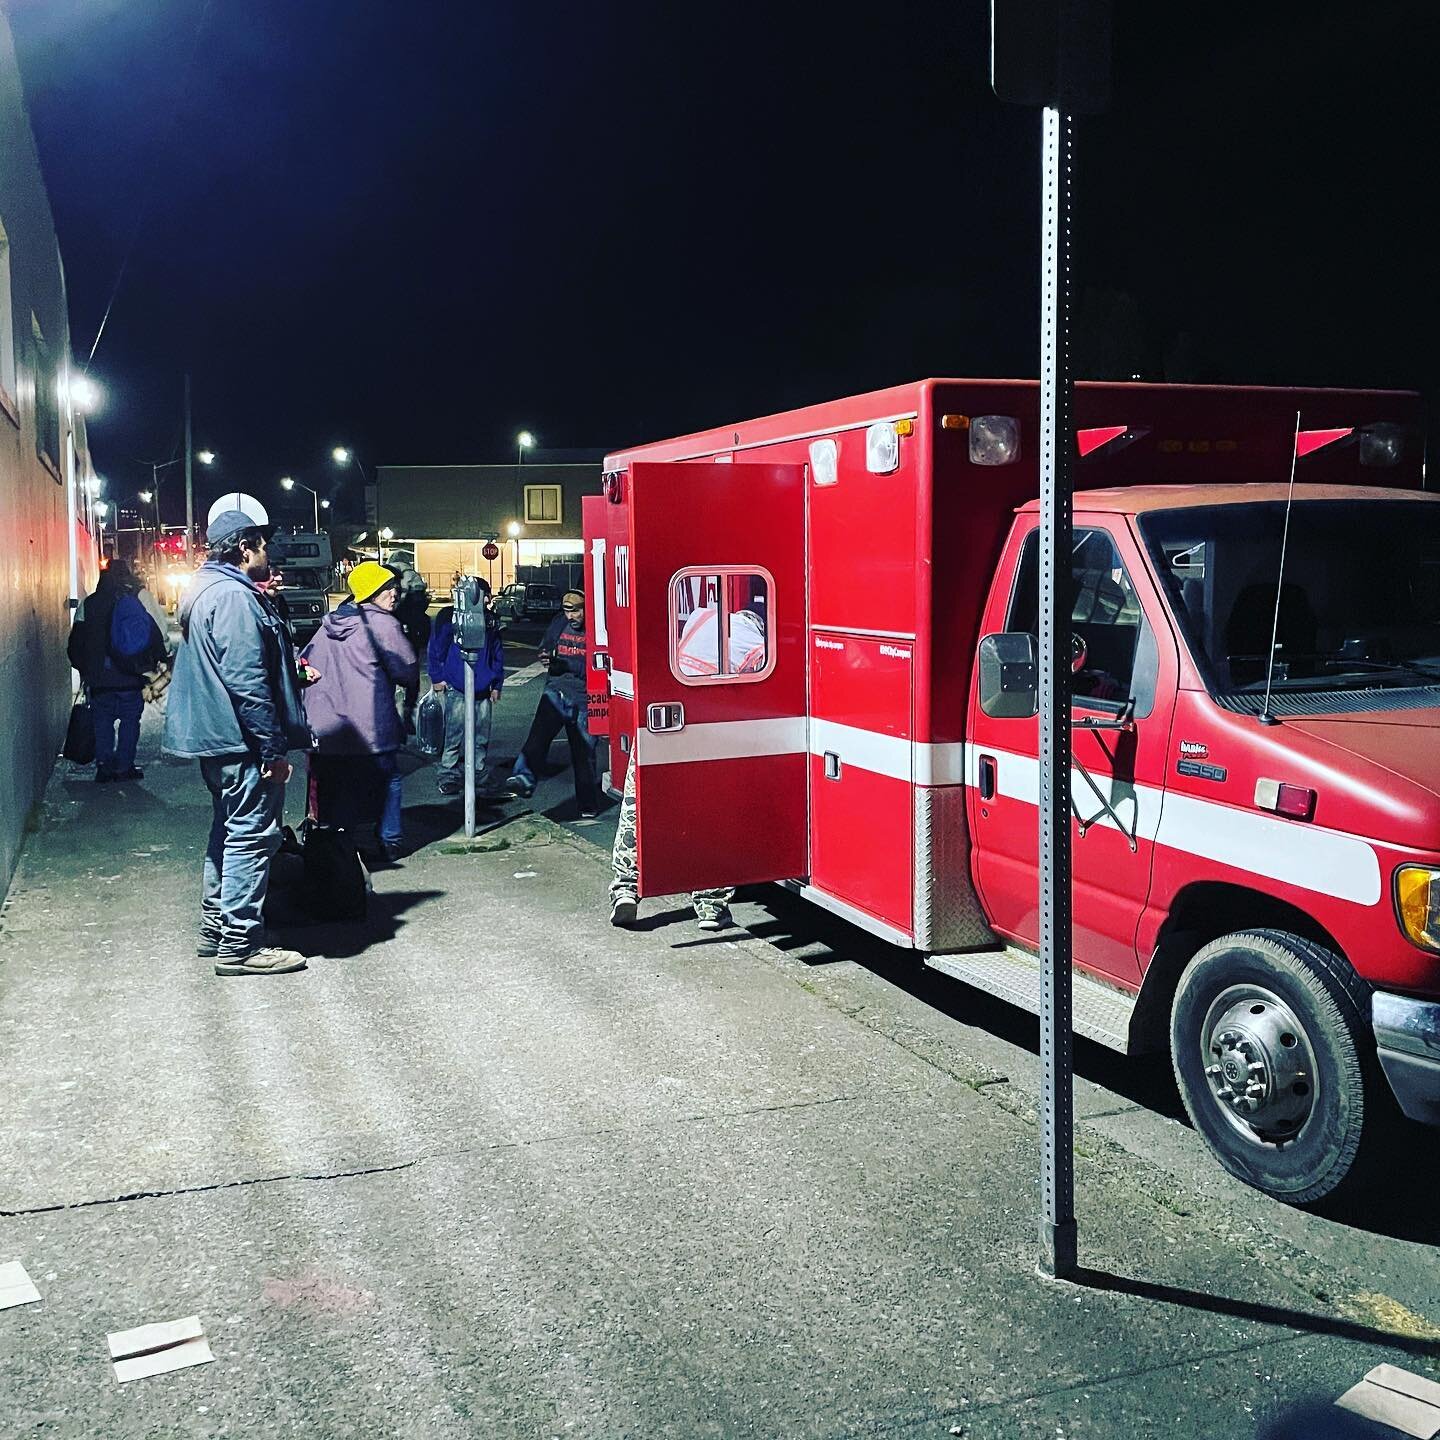 Another amazing night of serving out on the street! God is good and we are fortunate enough to be able to spread love and joy through serving #OlympiaHomeless #CityCampers #BlessedBlessed #Olympia #DoingSomething #RadBulance